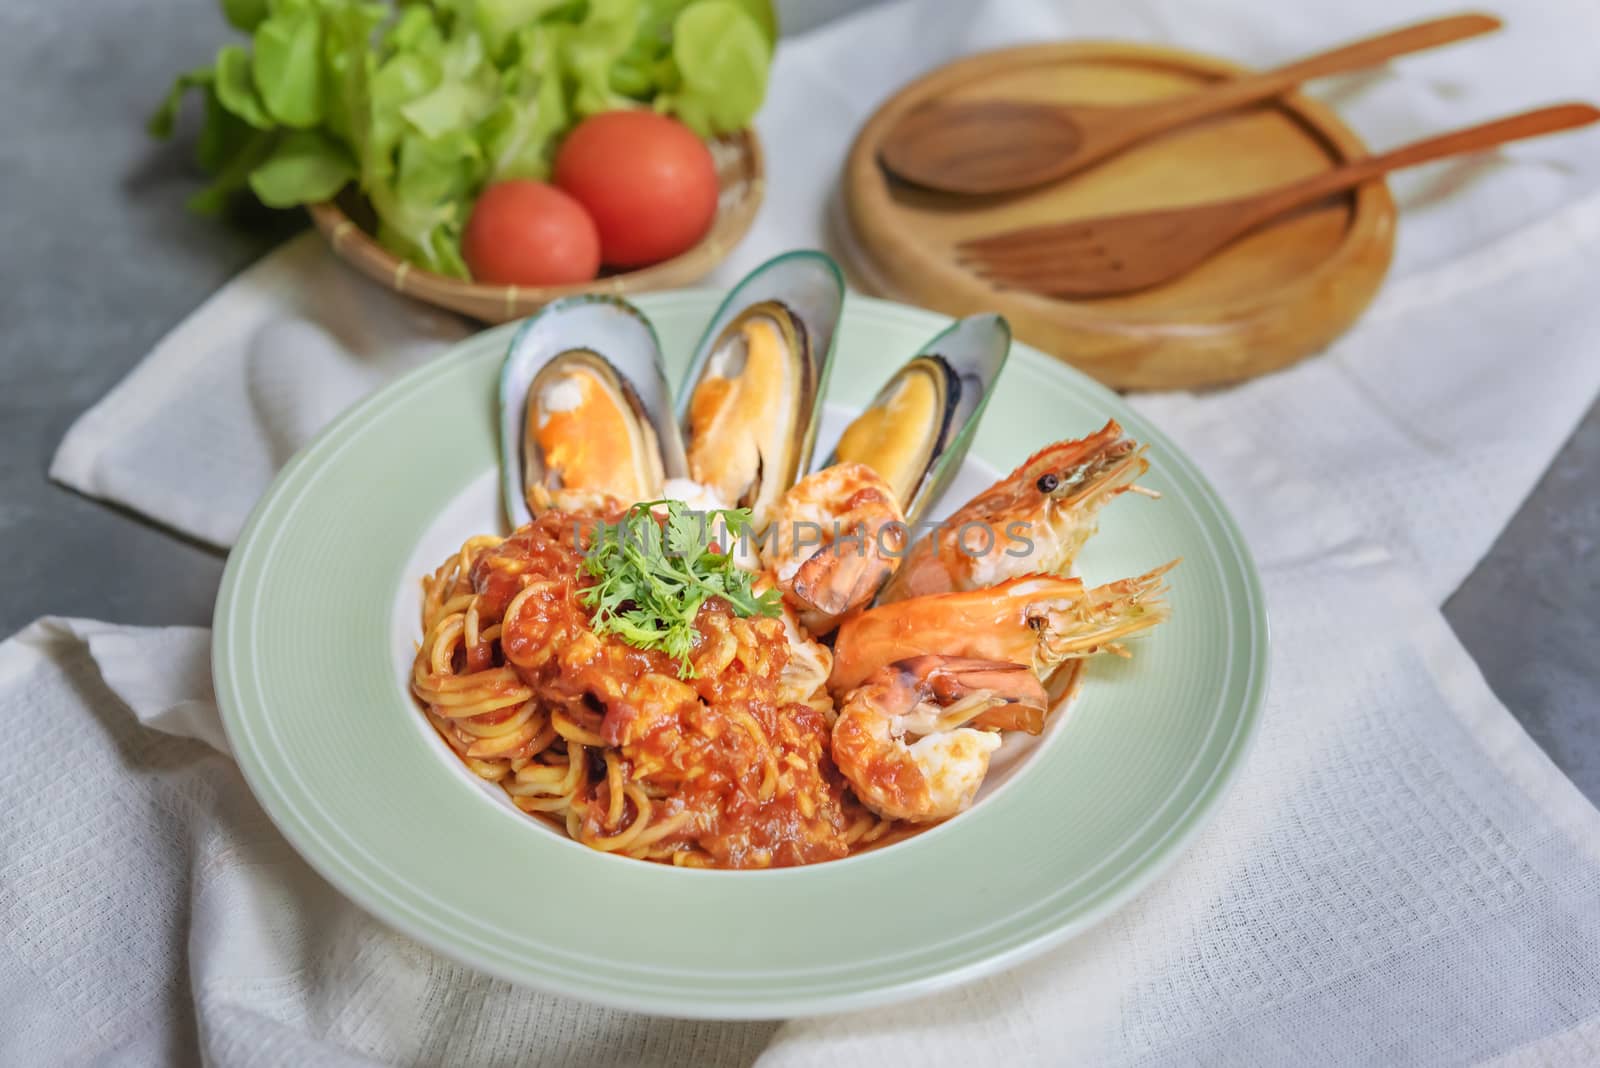 Spaghetti with seafood in tomato sauce on a plate